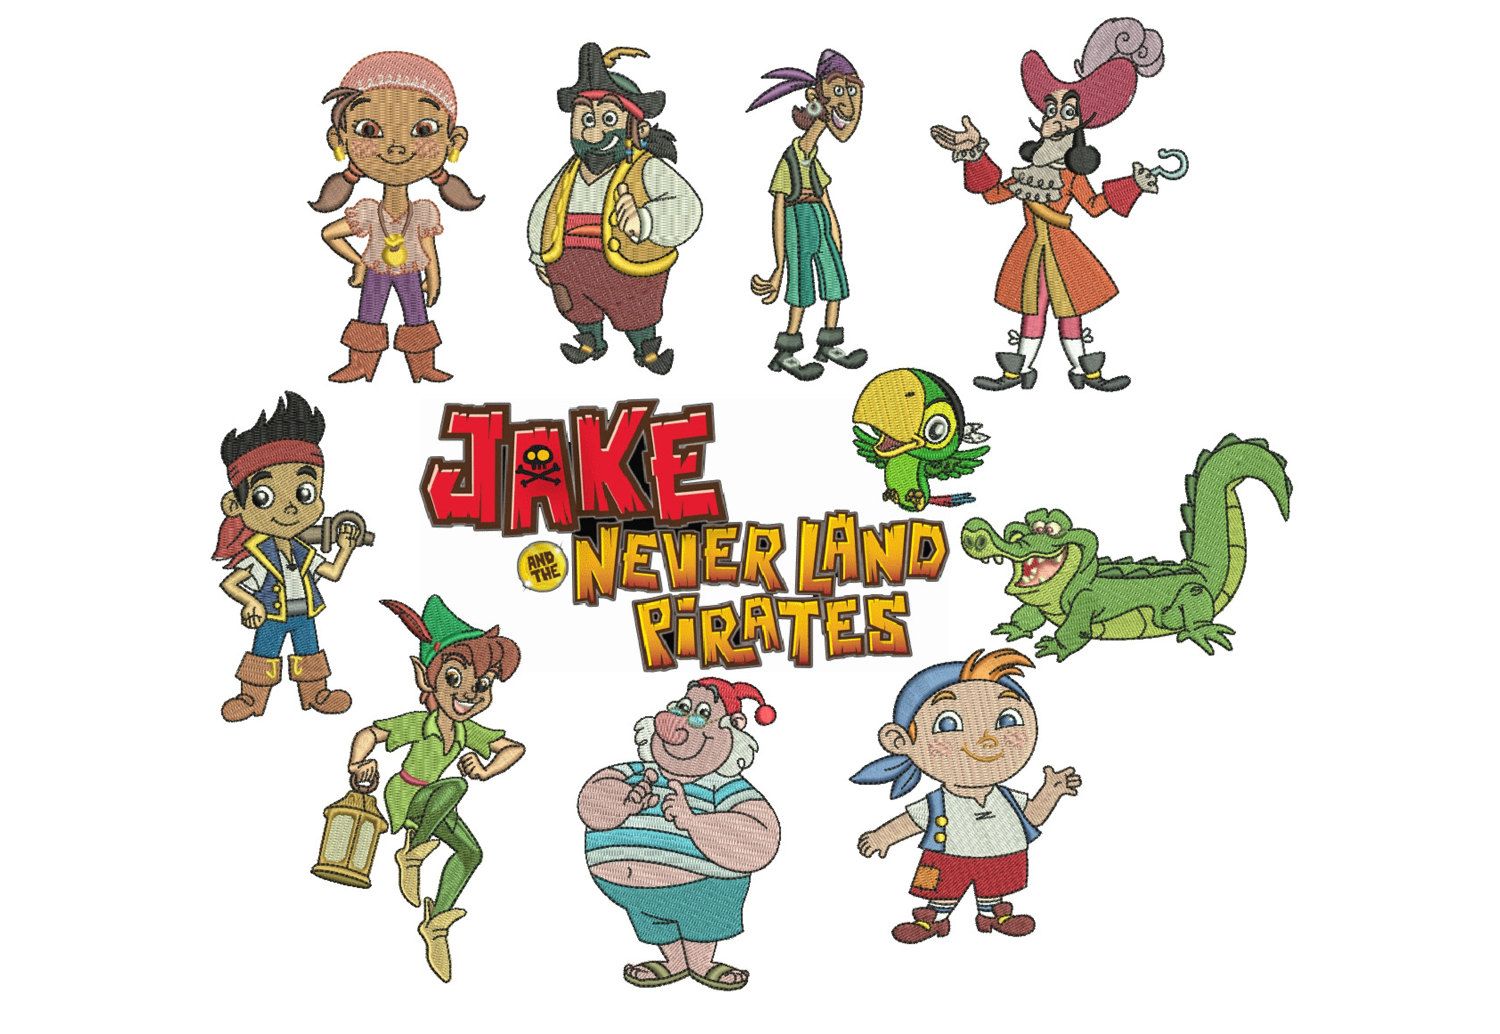 Jake and the Neverland Pirates Pan Embroidery Designs. Indian Digitizer Digitizing. Embroidery Patterns Library